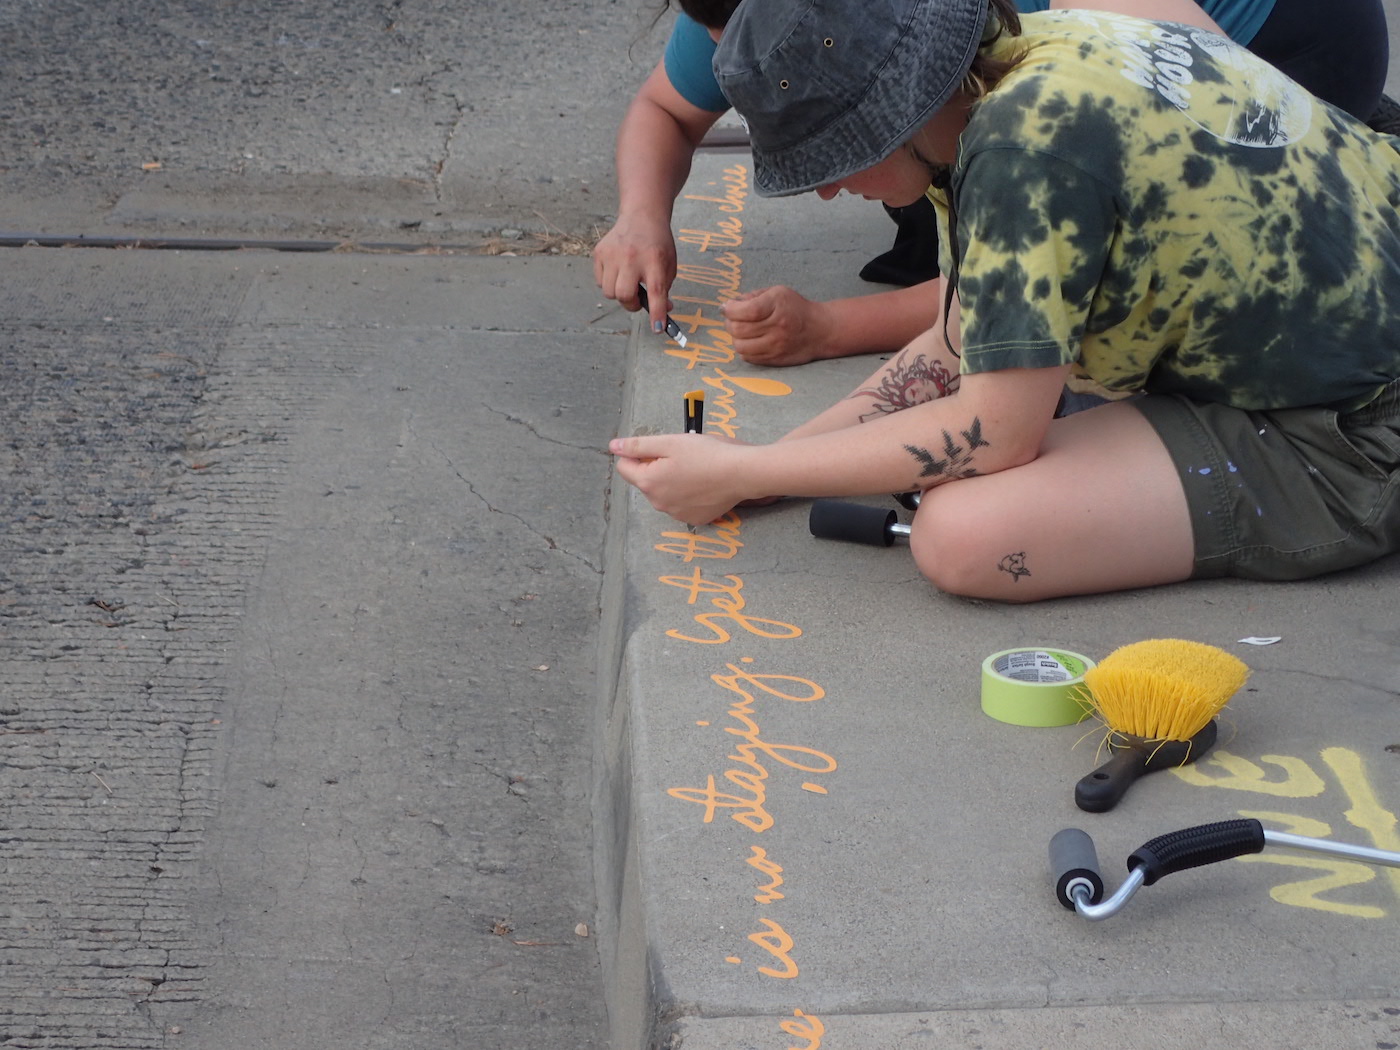 Two people writing orange poetry along the curb of a sidewalk.